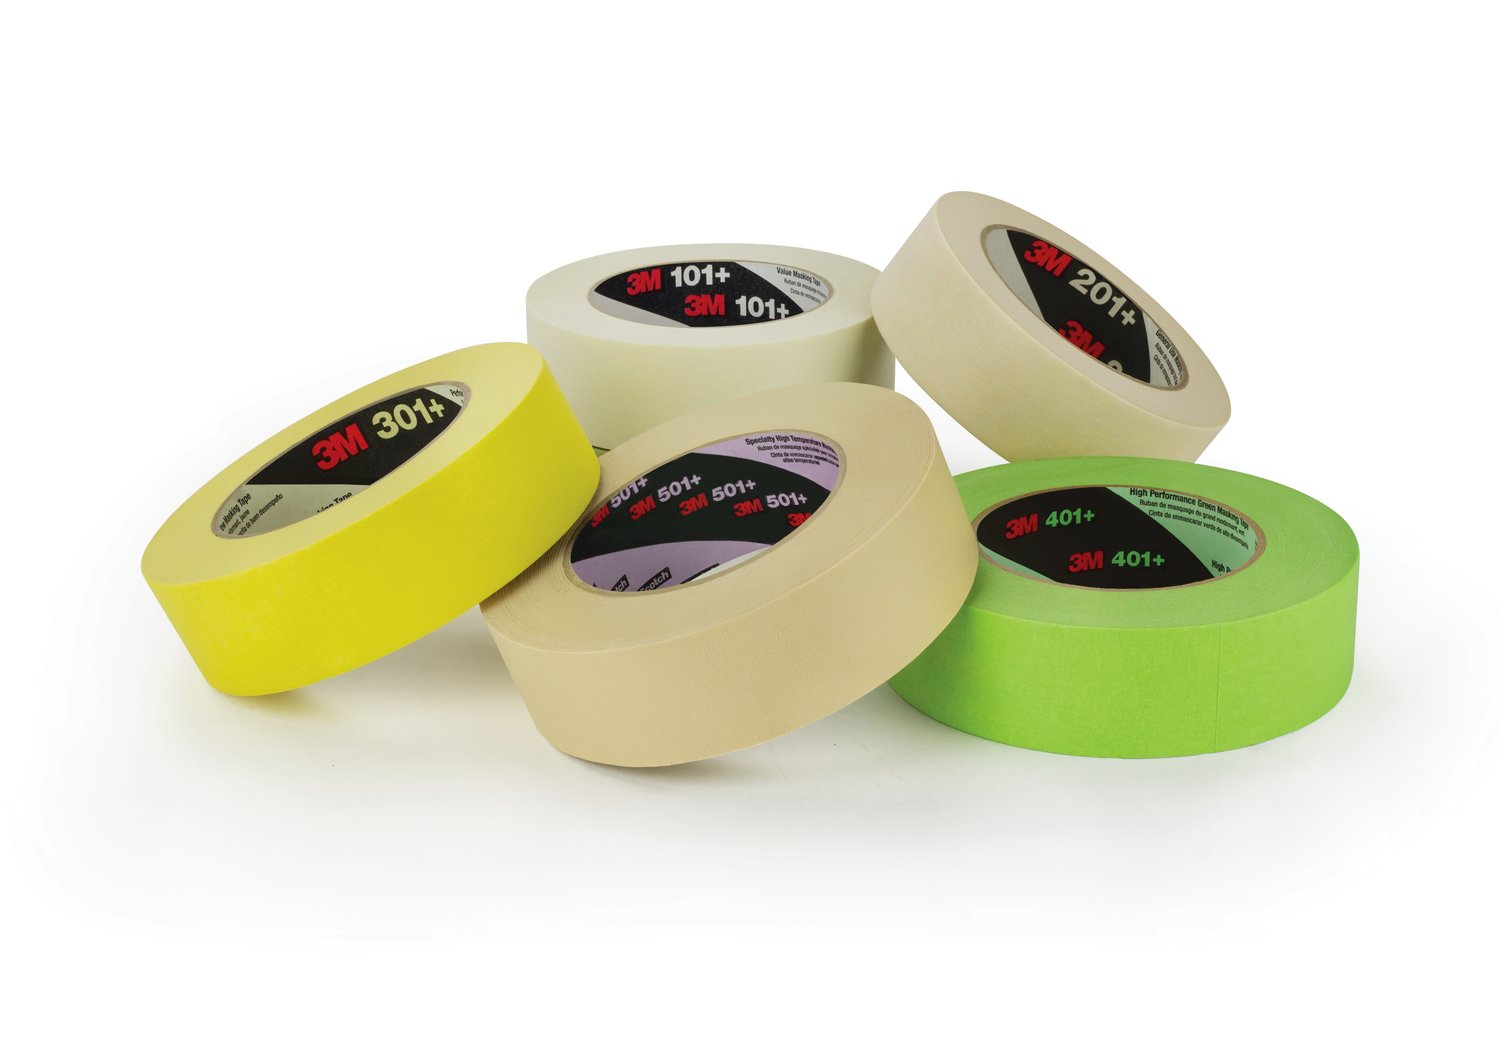 3M Scotch 0.94 in. x 60.1 yds. Masking Tape for Hard-to-Stick